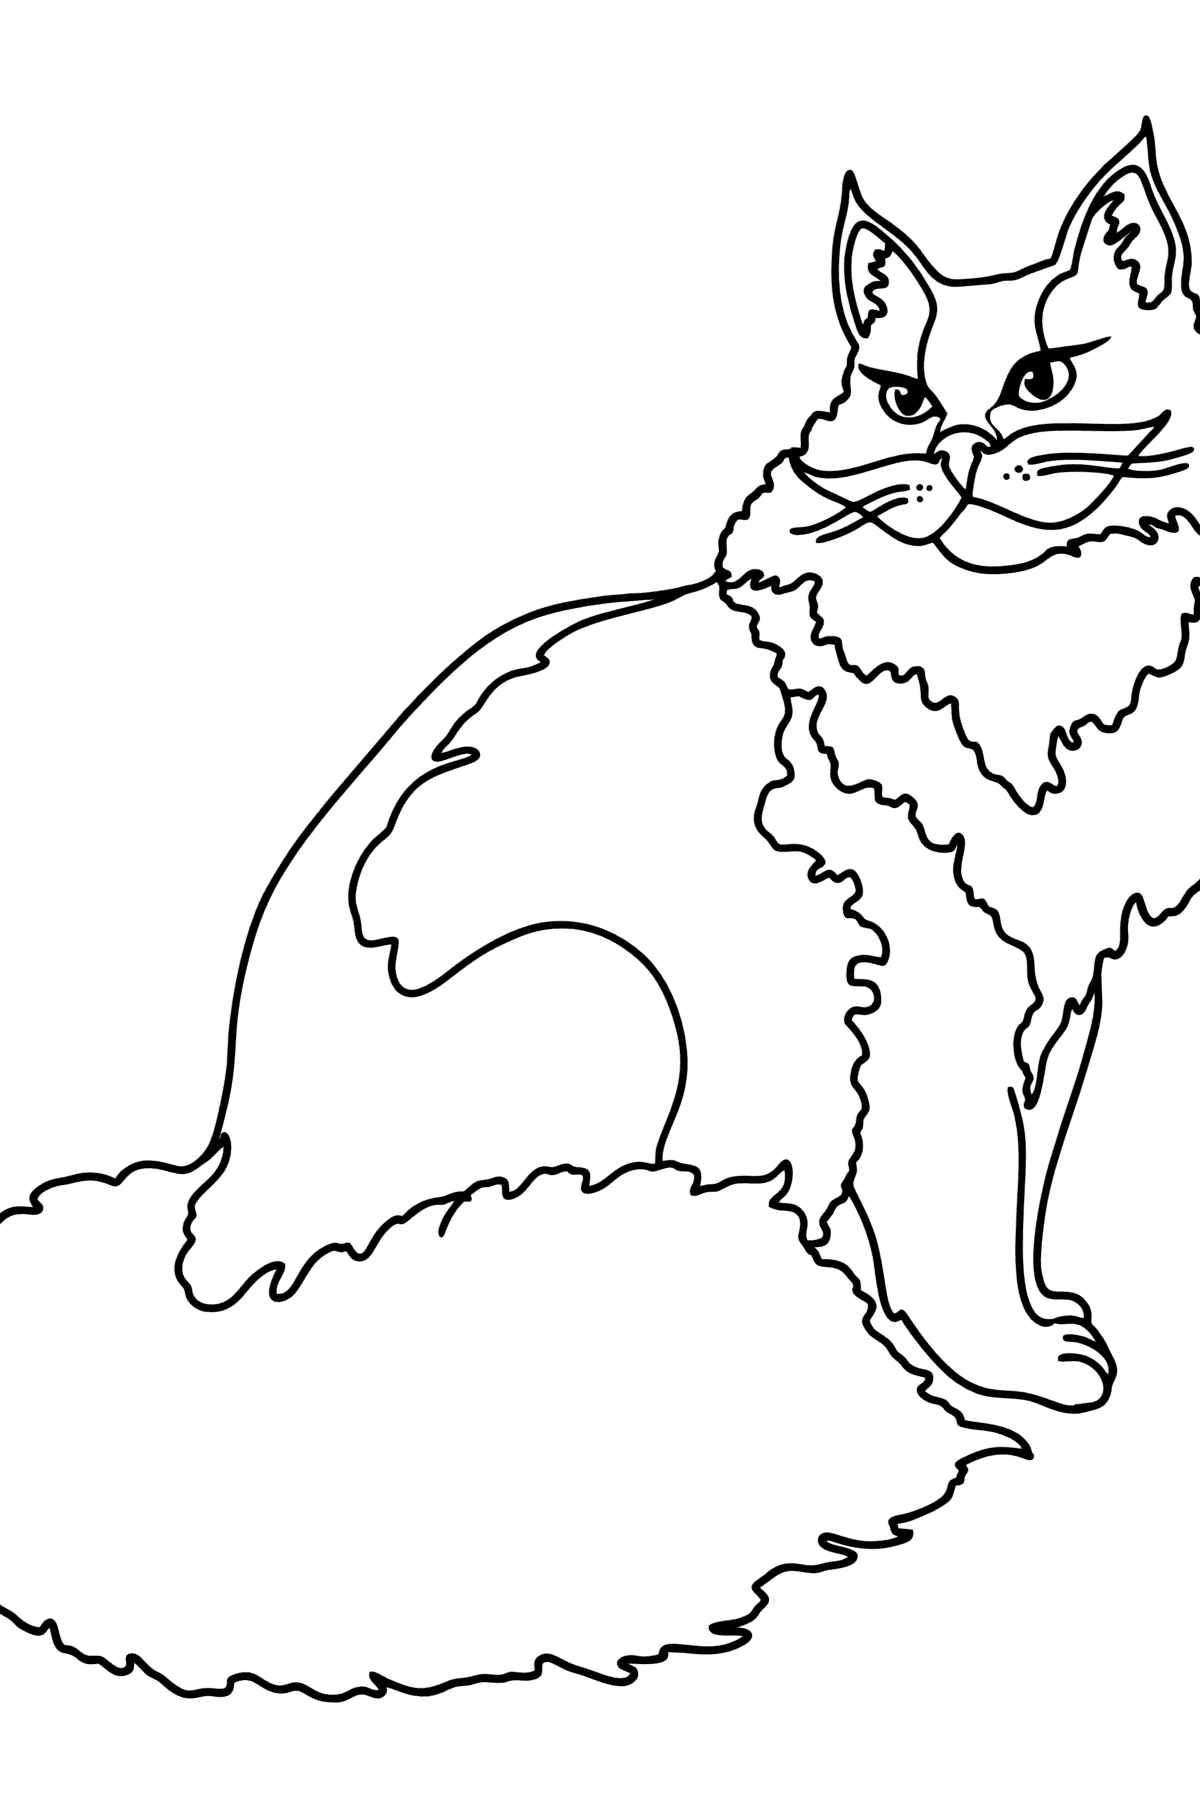 Turkish Cat coloring page - Coloring Pages for Kids